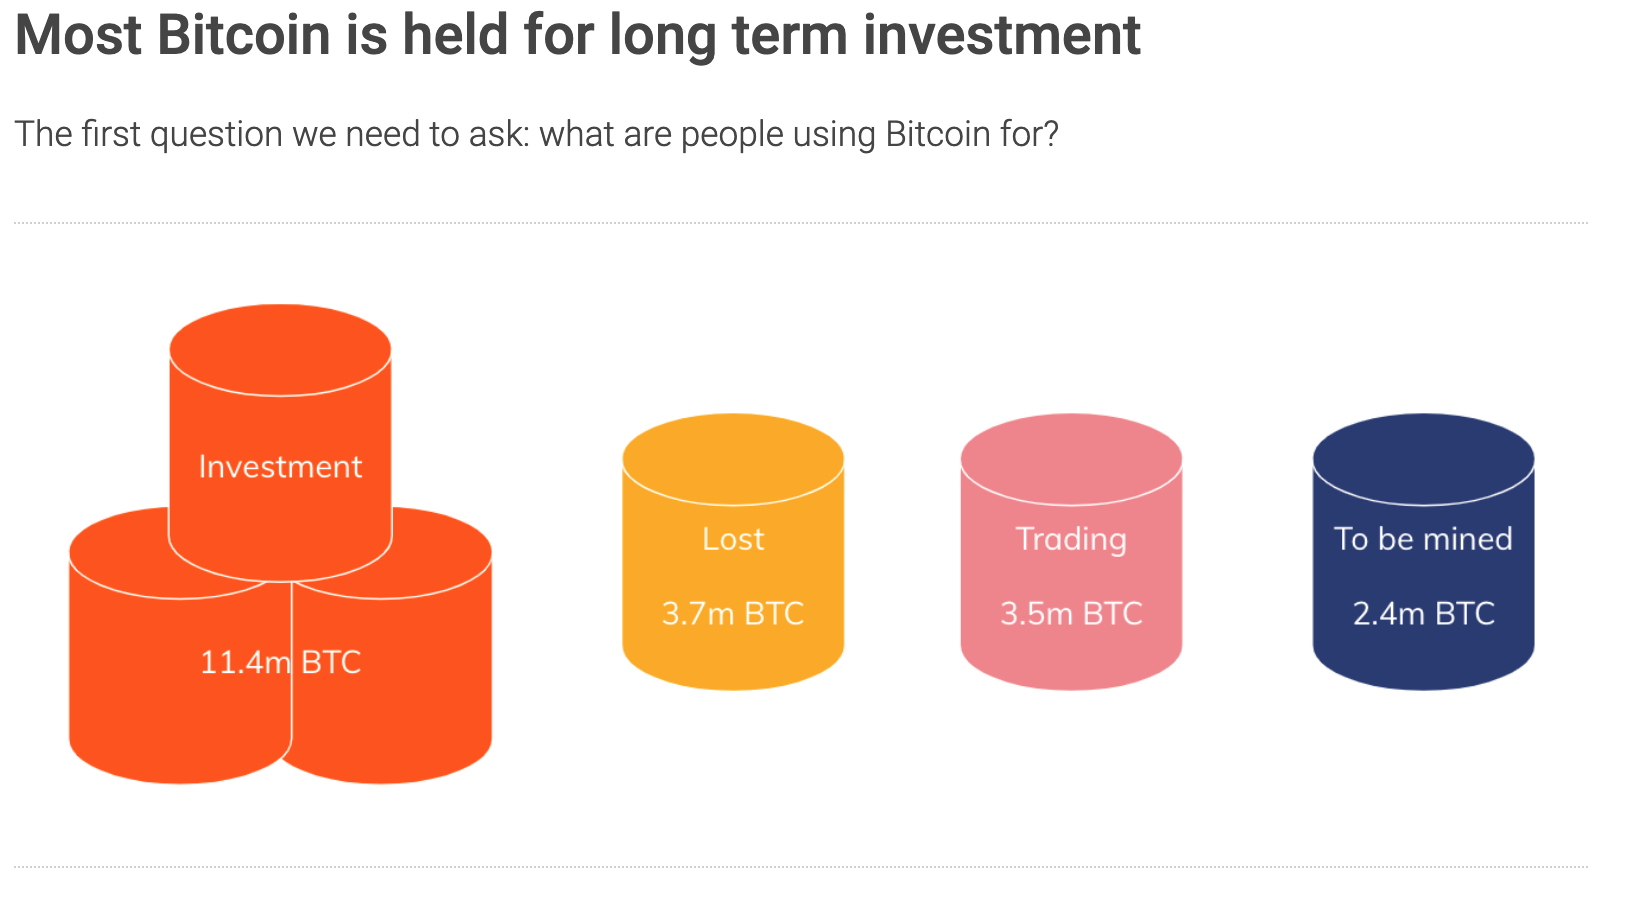 Most Bitcoin is held as long-term investment.